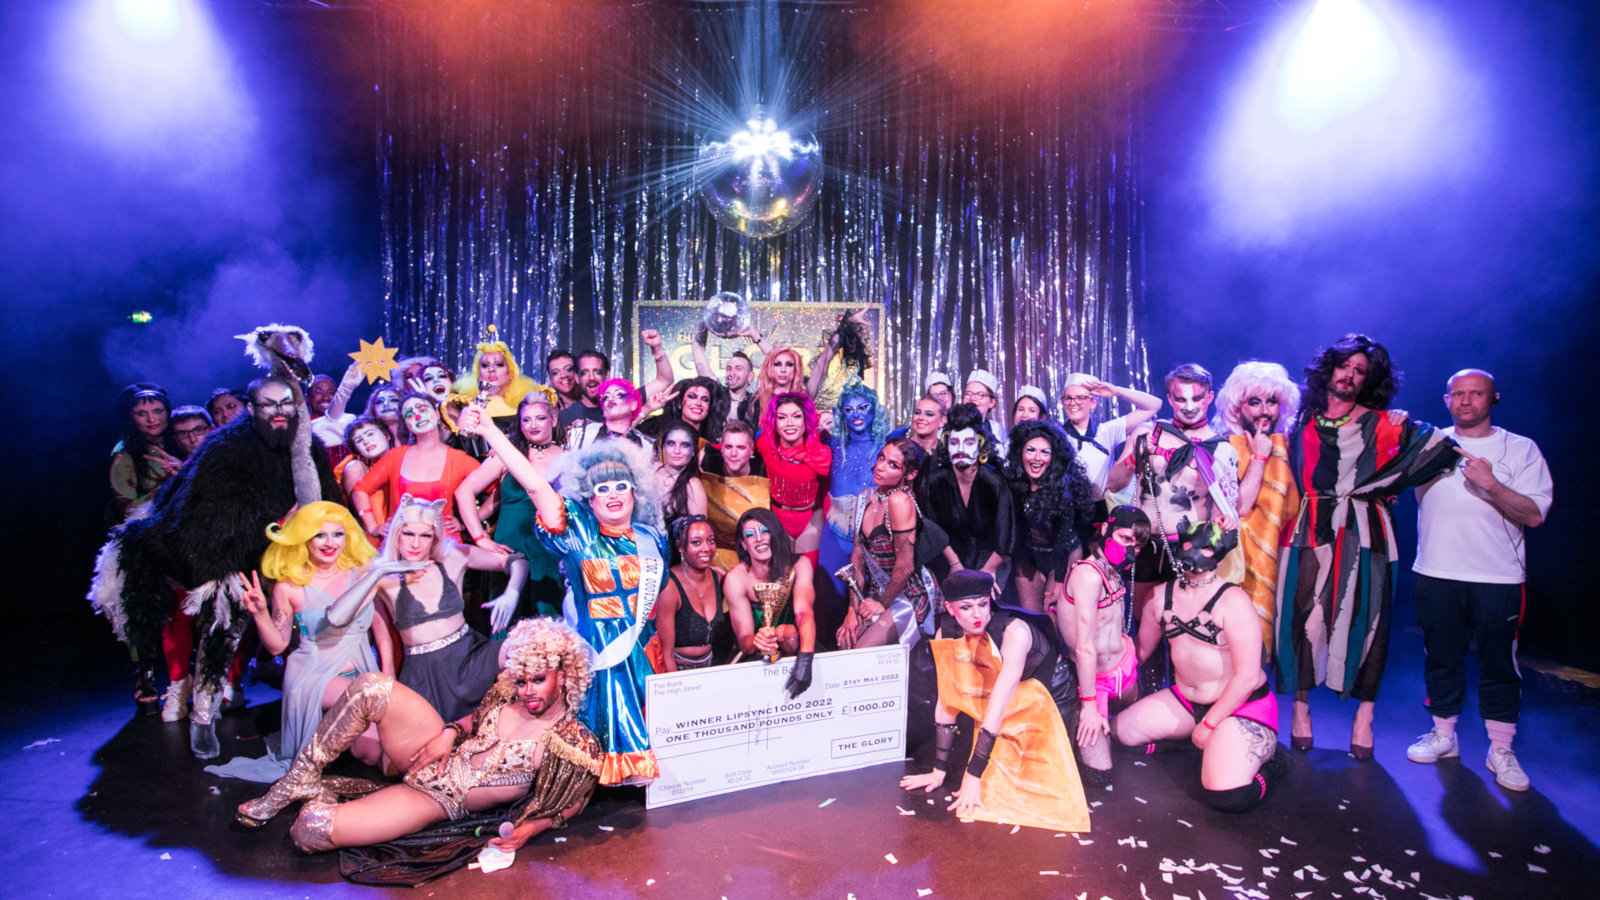 A stage with lots of people in drag and regular clothing, with lights and colored paper, as well as a giant cheque.